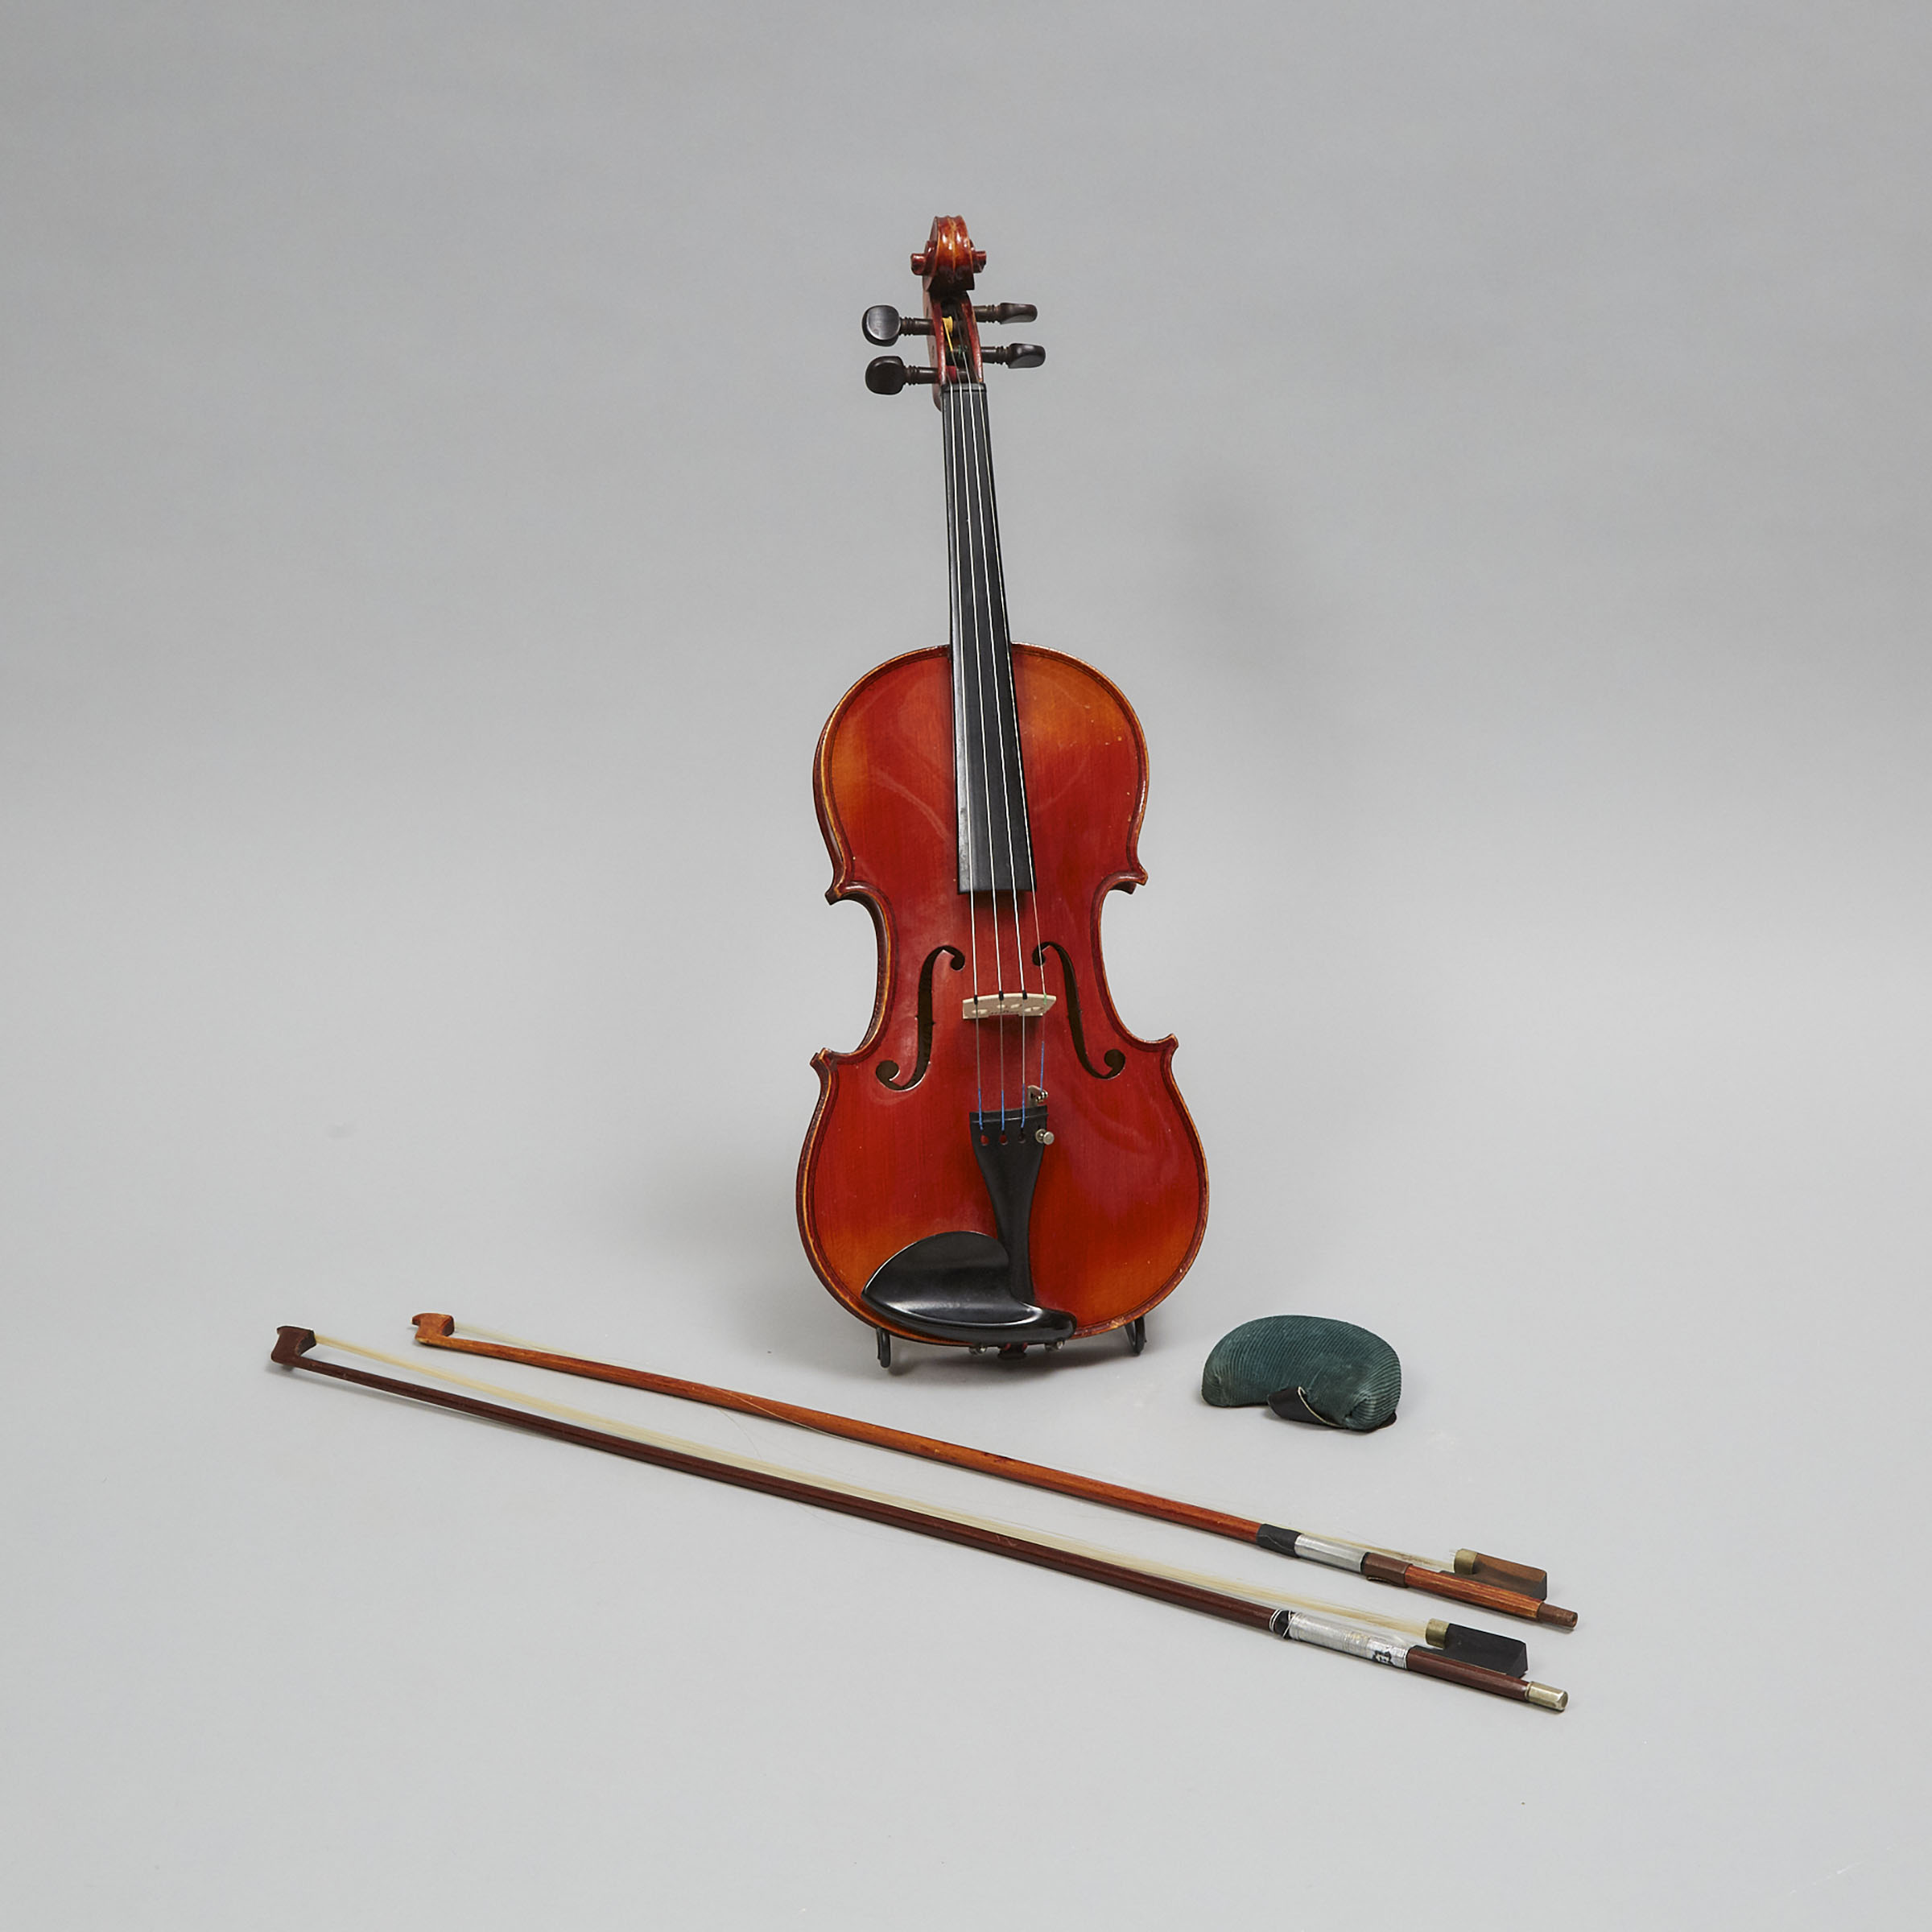 French Violin from the Workshop of Marc Laberte, Mirecourt, Vosges, 20th century